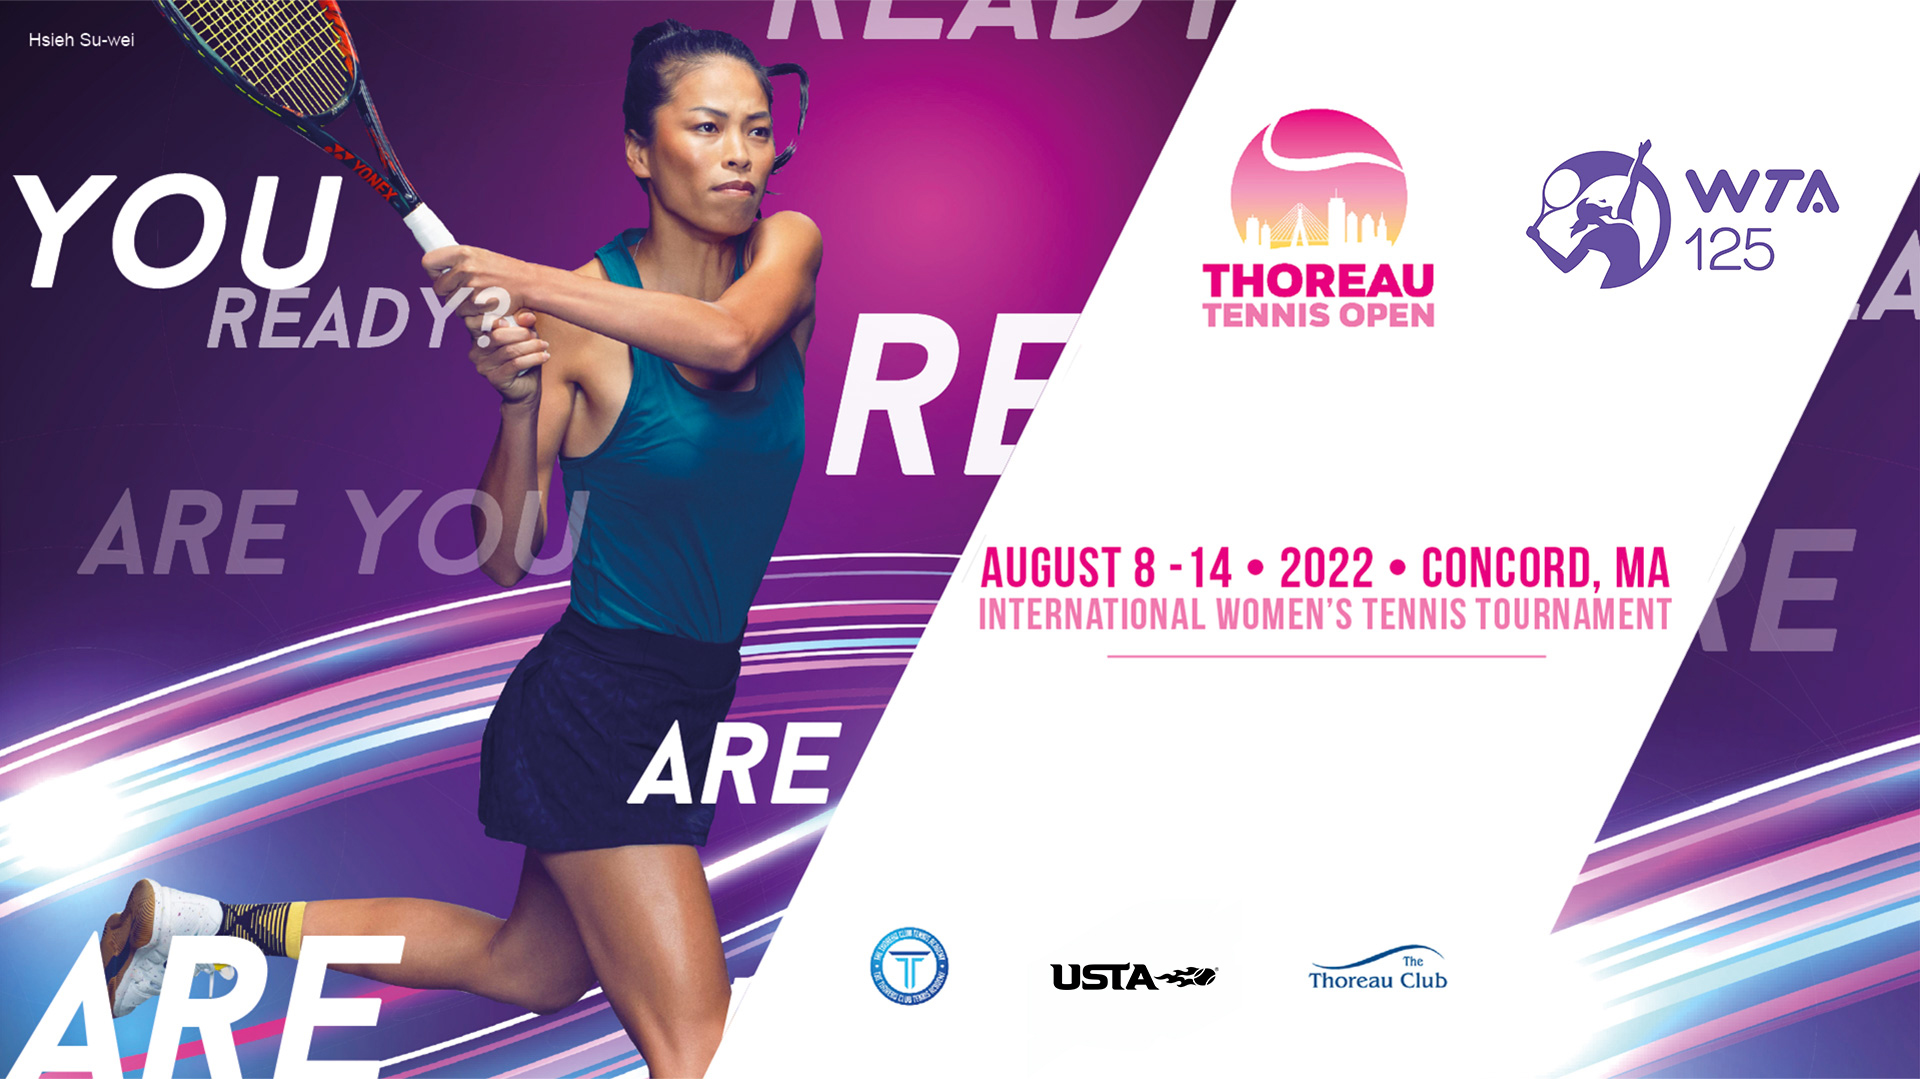 Get your tickets for WTA Thoreau Tennis Open! Concord, MA